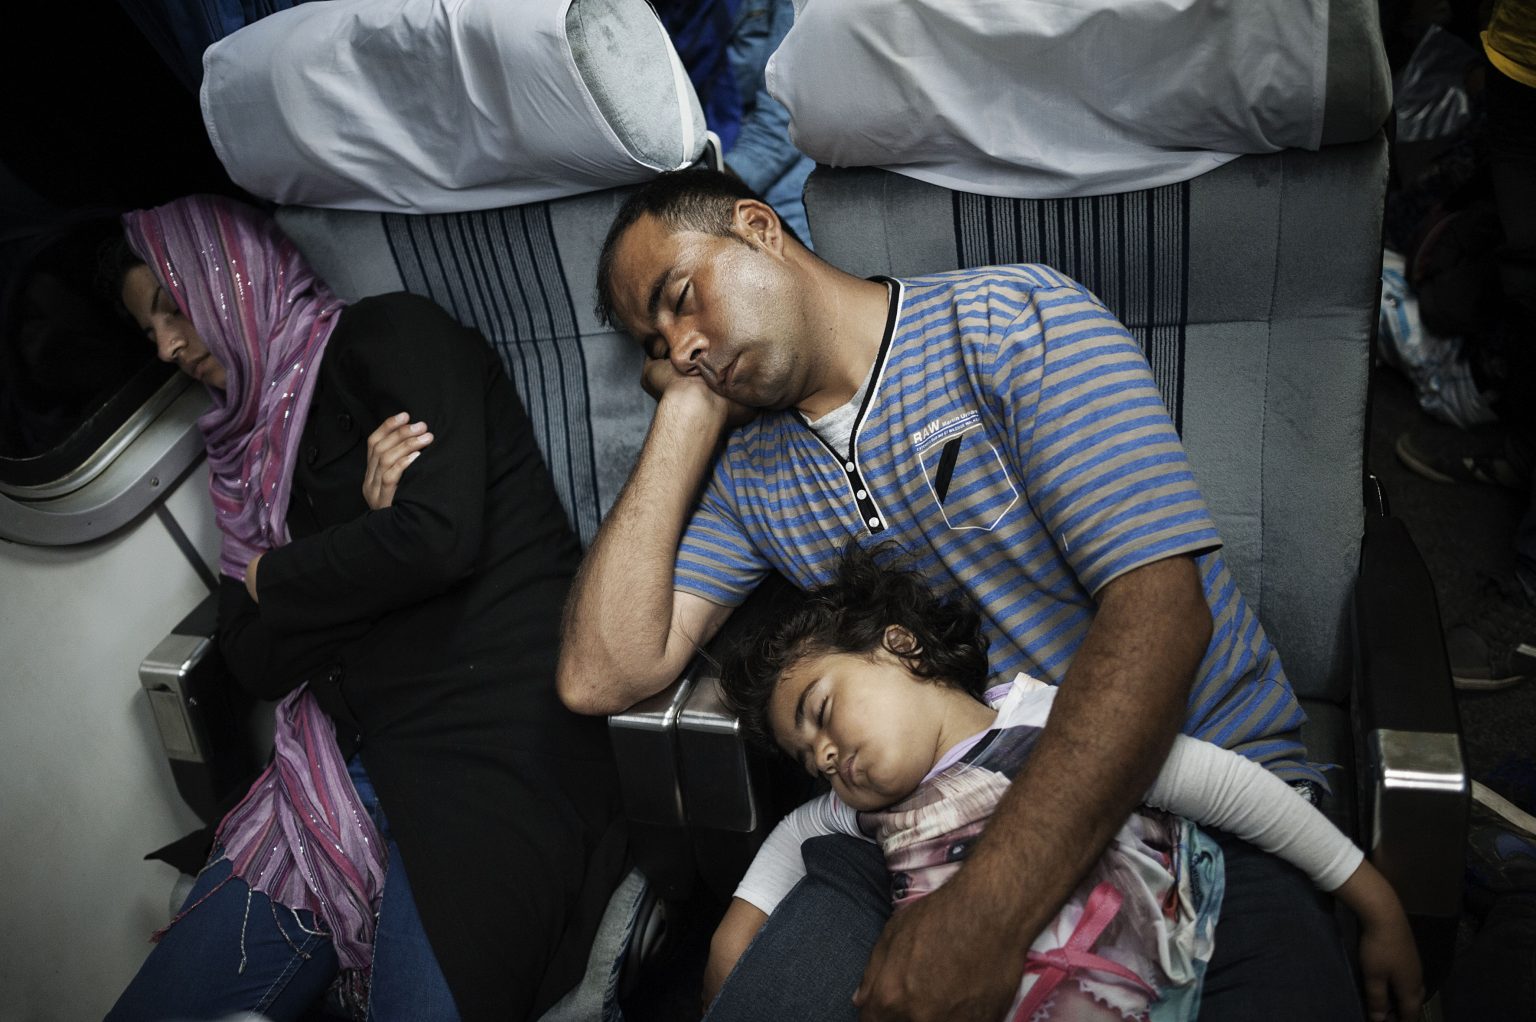 Novi Sad, July 2015 - Novi Sad, July 14 2015 - Afghan and Pakistani immigrants travelling on a train started from Belgrade railway station and proceeding towards the city of Subotica, arrival point of most of the refugees who want to cross the border between Serbia and Hungary.     
-----
Since the Greek border has been a place almost inaccessible to migratory flows, the Balkan route for migrants has become the new access road to Europe. But since March 2015, the Hungarian Government has been clamoring for an anti-immigration policy. In July 14th, 2015 Hungary has started building an anti-migrant fence on Serbian border.   
>< 
Novi Sad, Serbia, luglio 2015 - Immigrati afghani e pakistani viaggiano su un treno partito dalla stazione di Bwelgrado e diretto alla citt di Subotica, punto di arrivo della maggior parte dei profughi che vogliono attraversare il confine tra Serbia e Ungheria.
----- 
Da quando la frontiera greca  un posto quasi inaccessibile per i flussi migratori, la rotta balcanica  diventata per i migranti la nuova via di accesso all?Europa. Ma da marzo 2015 il governo ungherese sta spingendo per una politica di anti immigrazione. Il 14 giugno 2015 l?Ungheria ha iniziato a costruire un muro al confine con la Serbia per fermare i migranti che cercano di entrare illegalmente in territorio ungherese. *** Local Caption *** 00563924